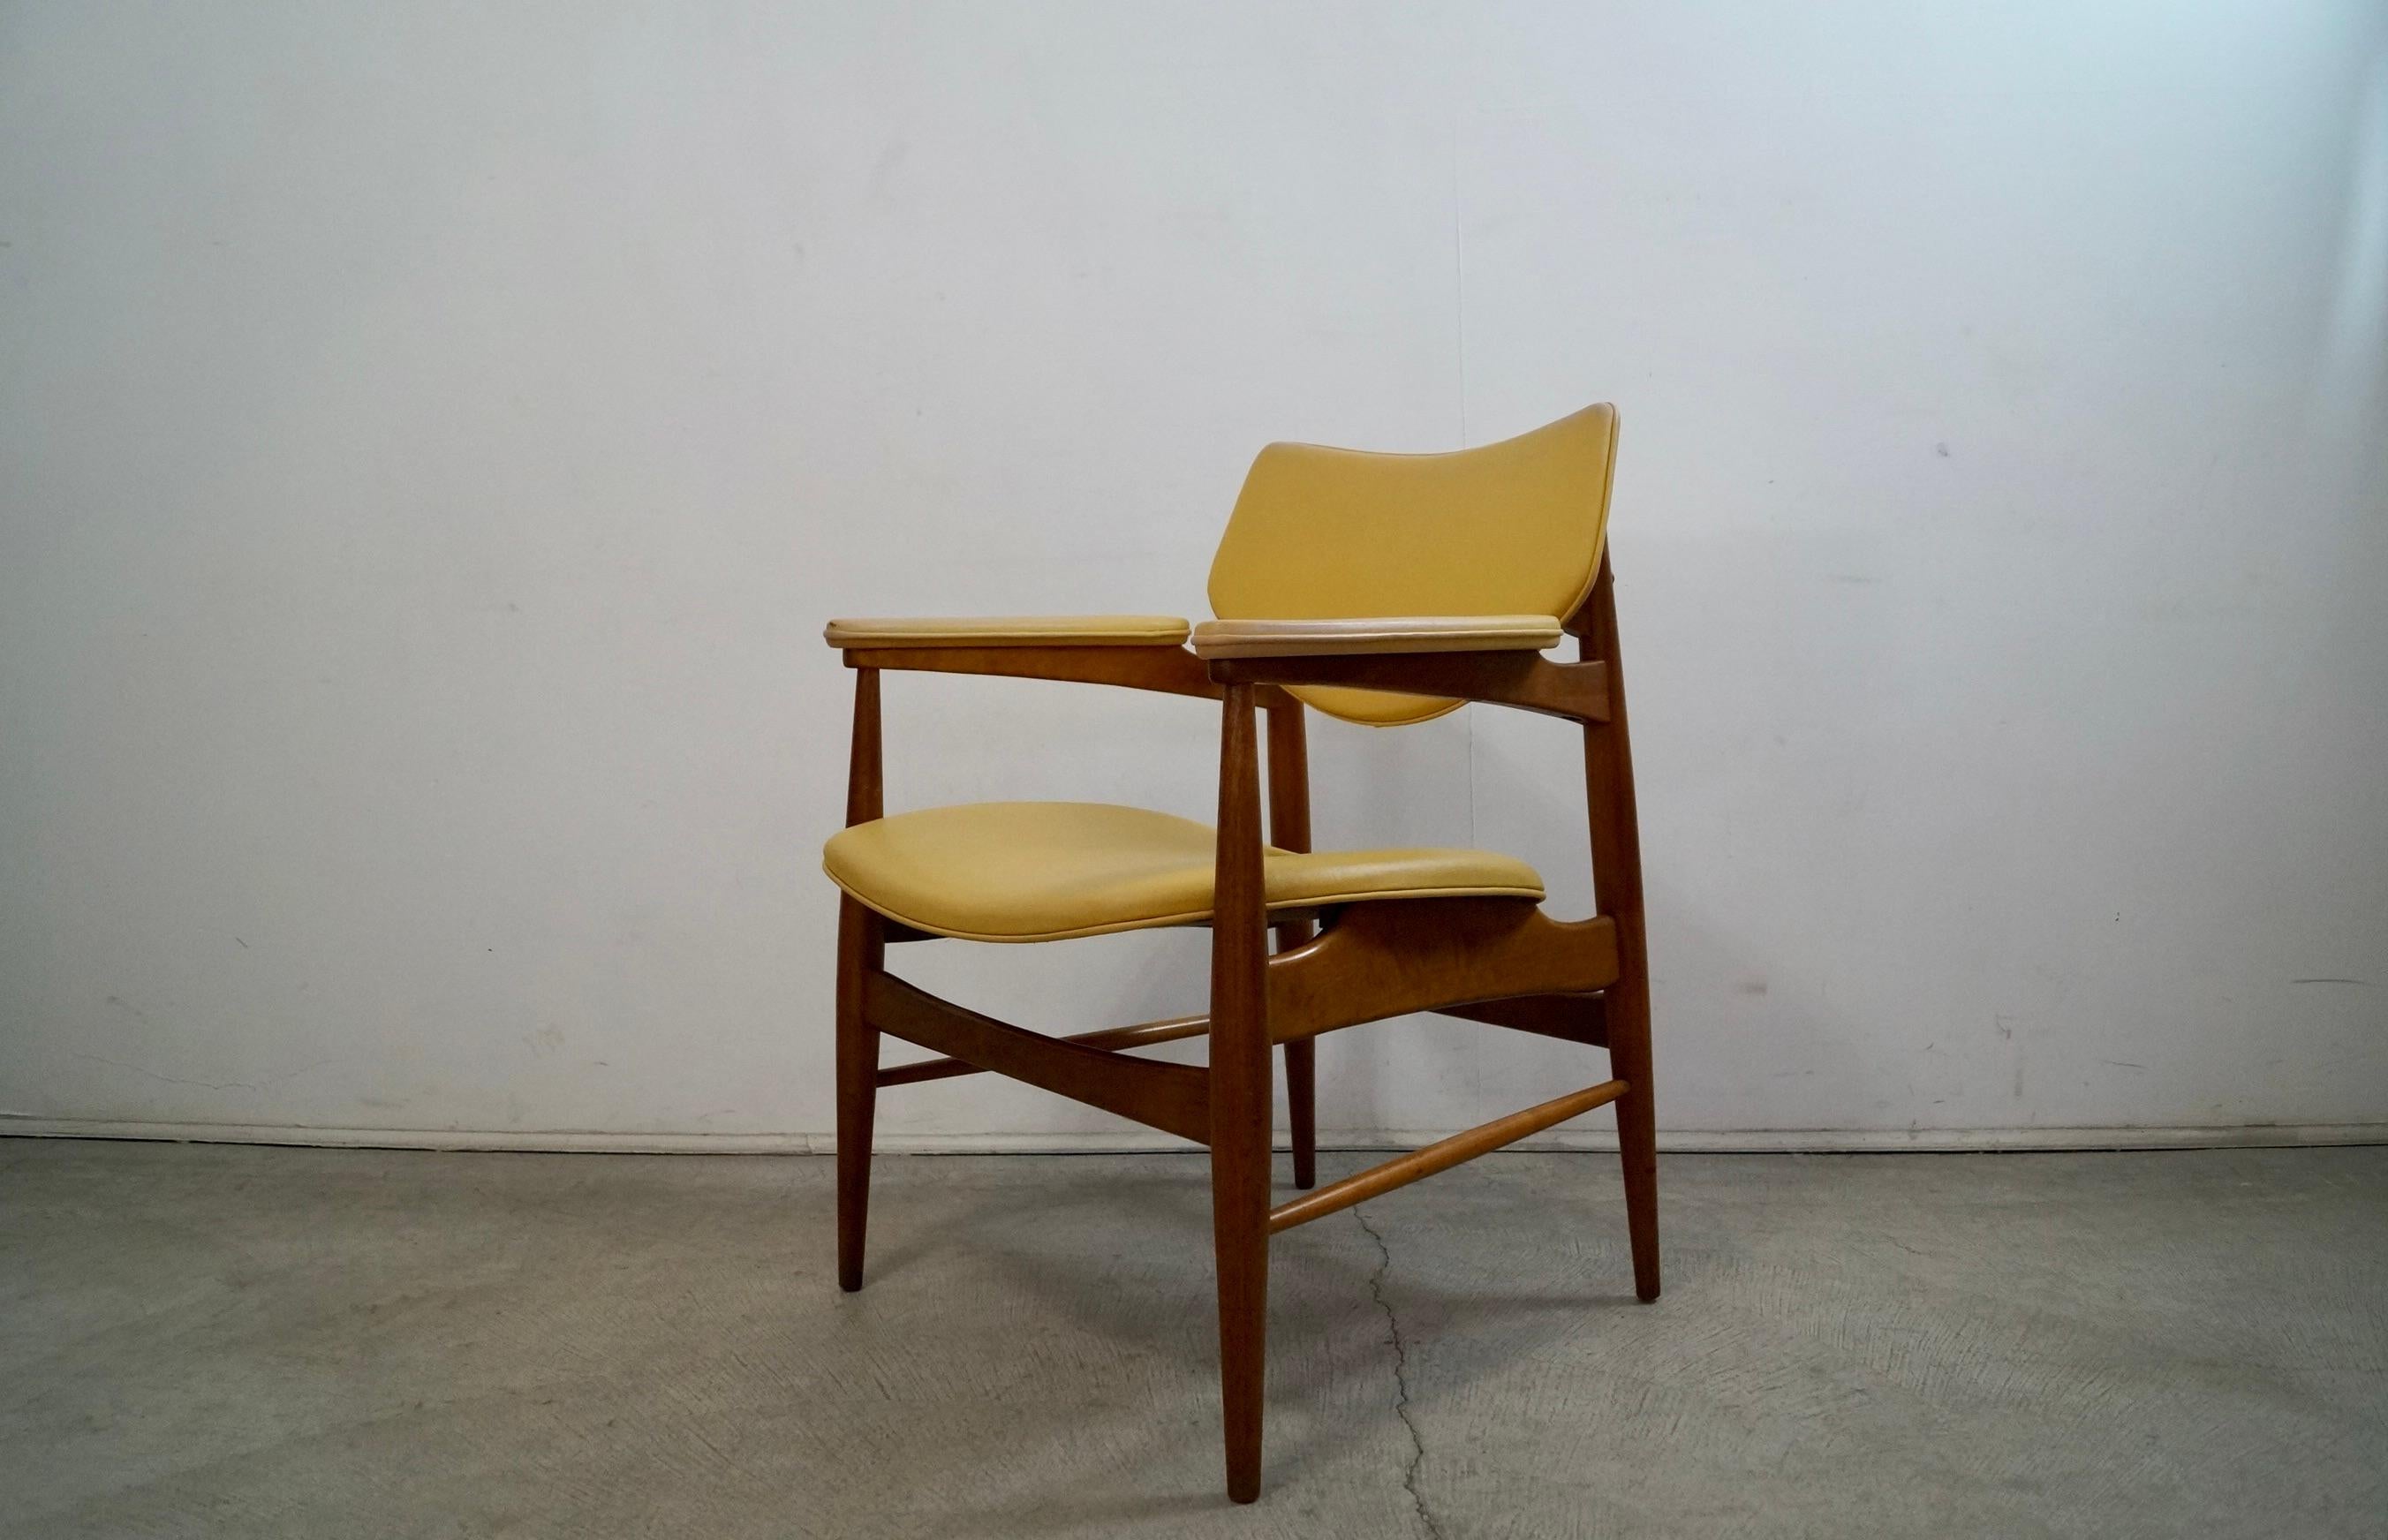 1950's Mid-Century Modern Walnut Armchair by Thonet In Good Condition For Sale In Burbank, CA